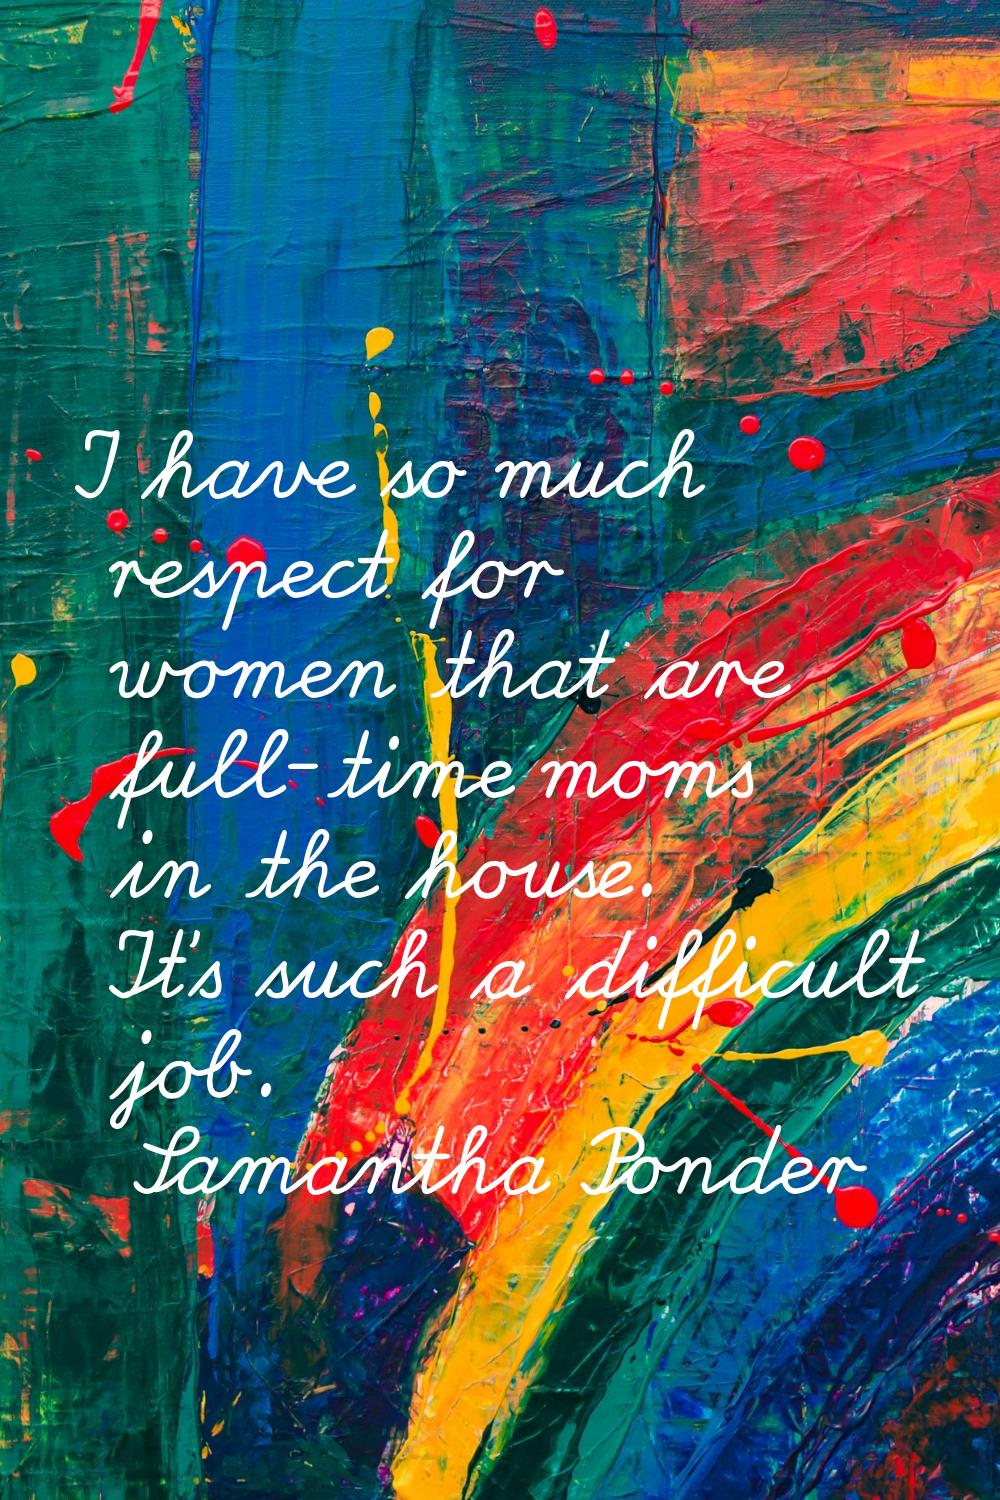 I have so much respect for women that are full-time moms in the house. It's such a difficult job.